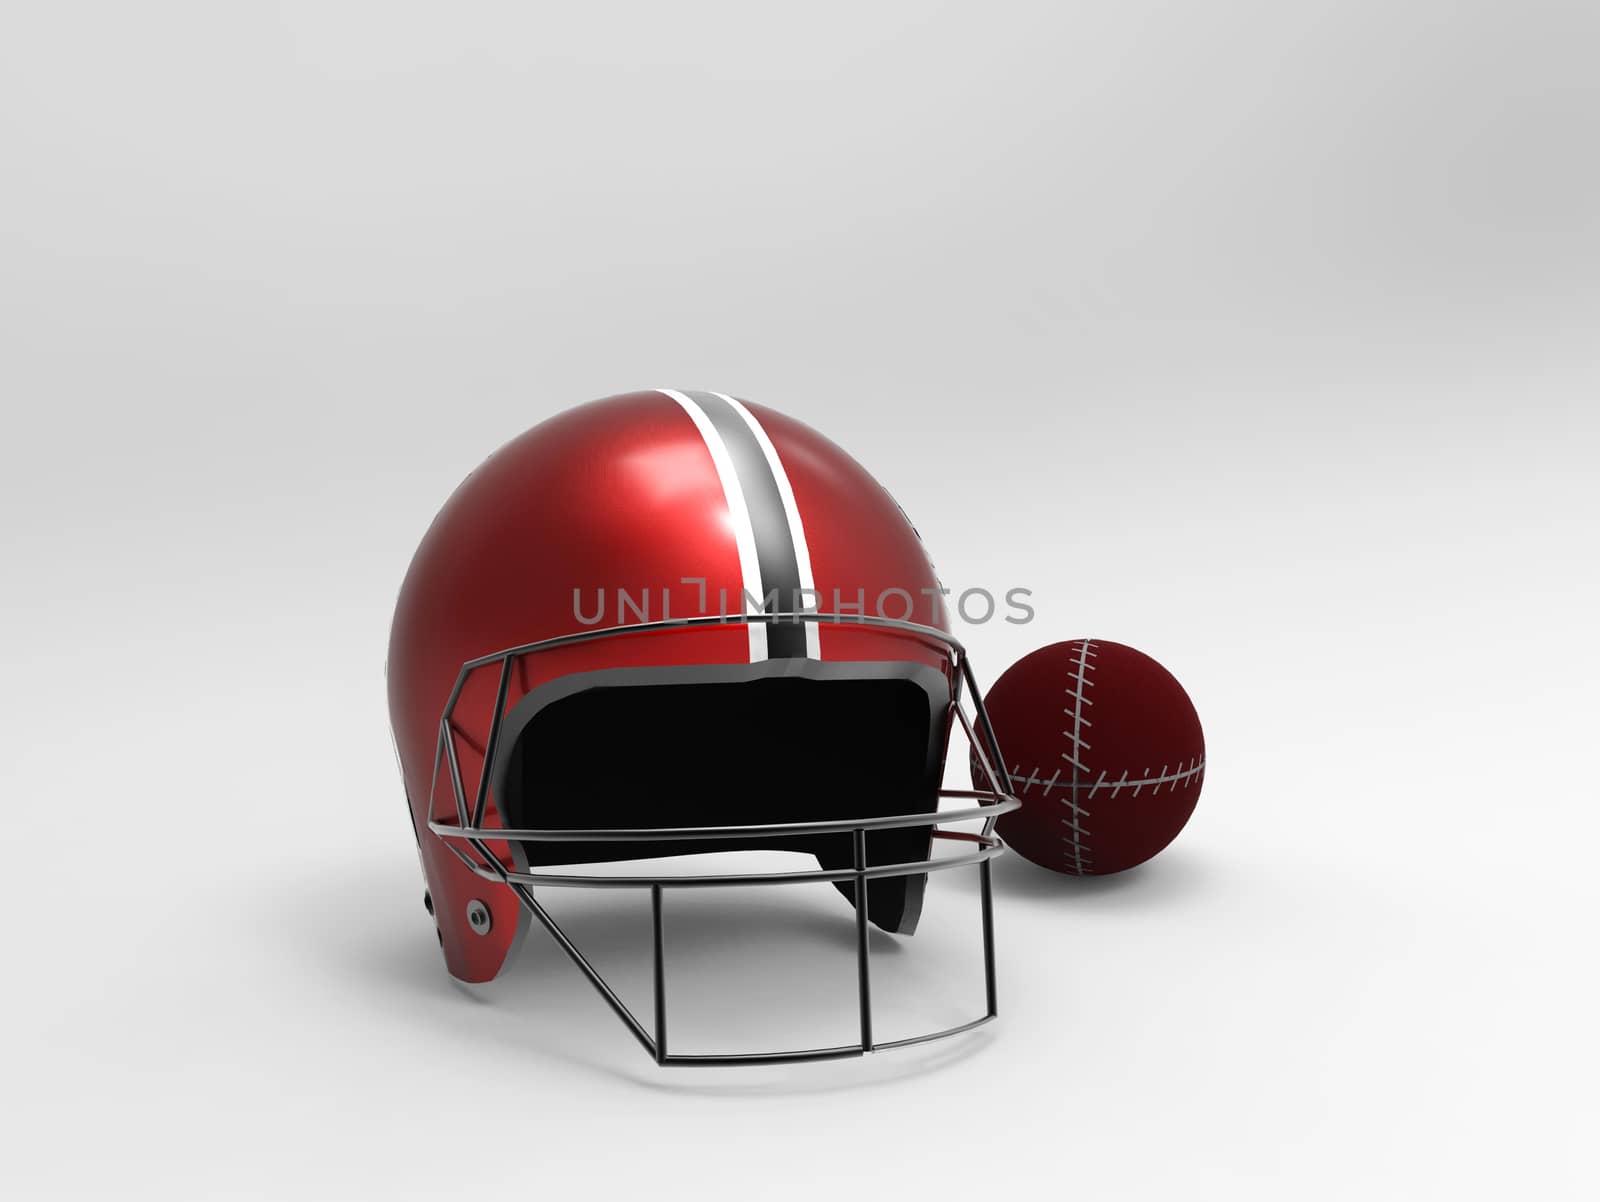 football helmet and Rugby ball for sport equipment.